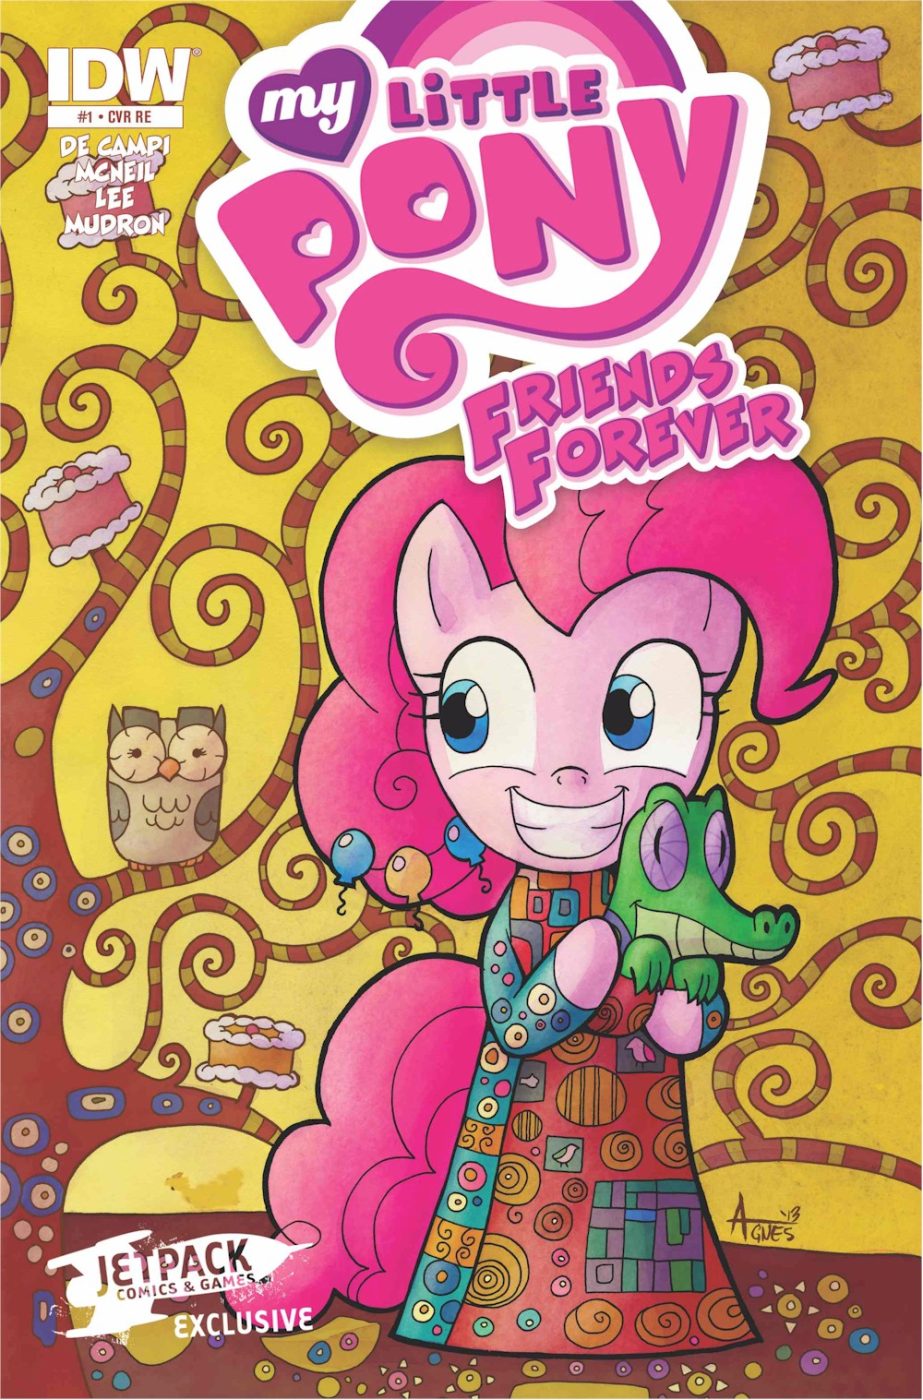 My Little Pony Friends Forever #1 (Jetpack Edition)